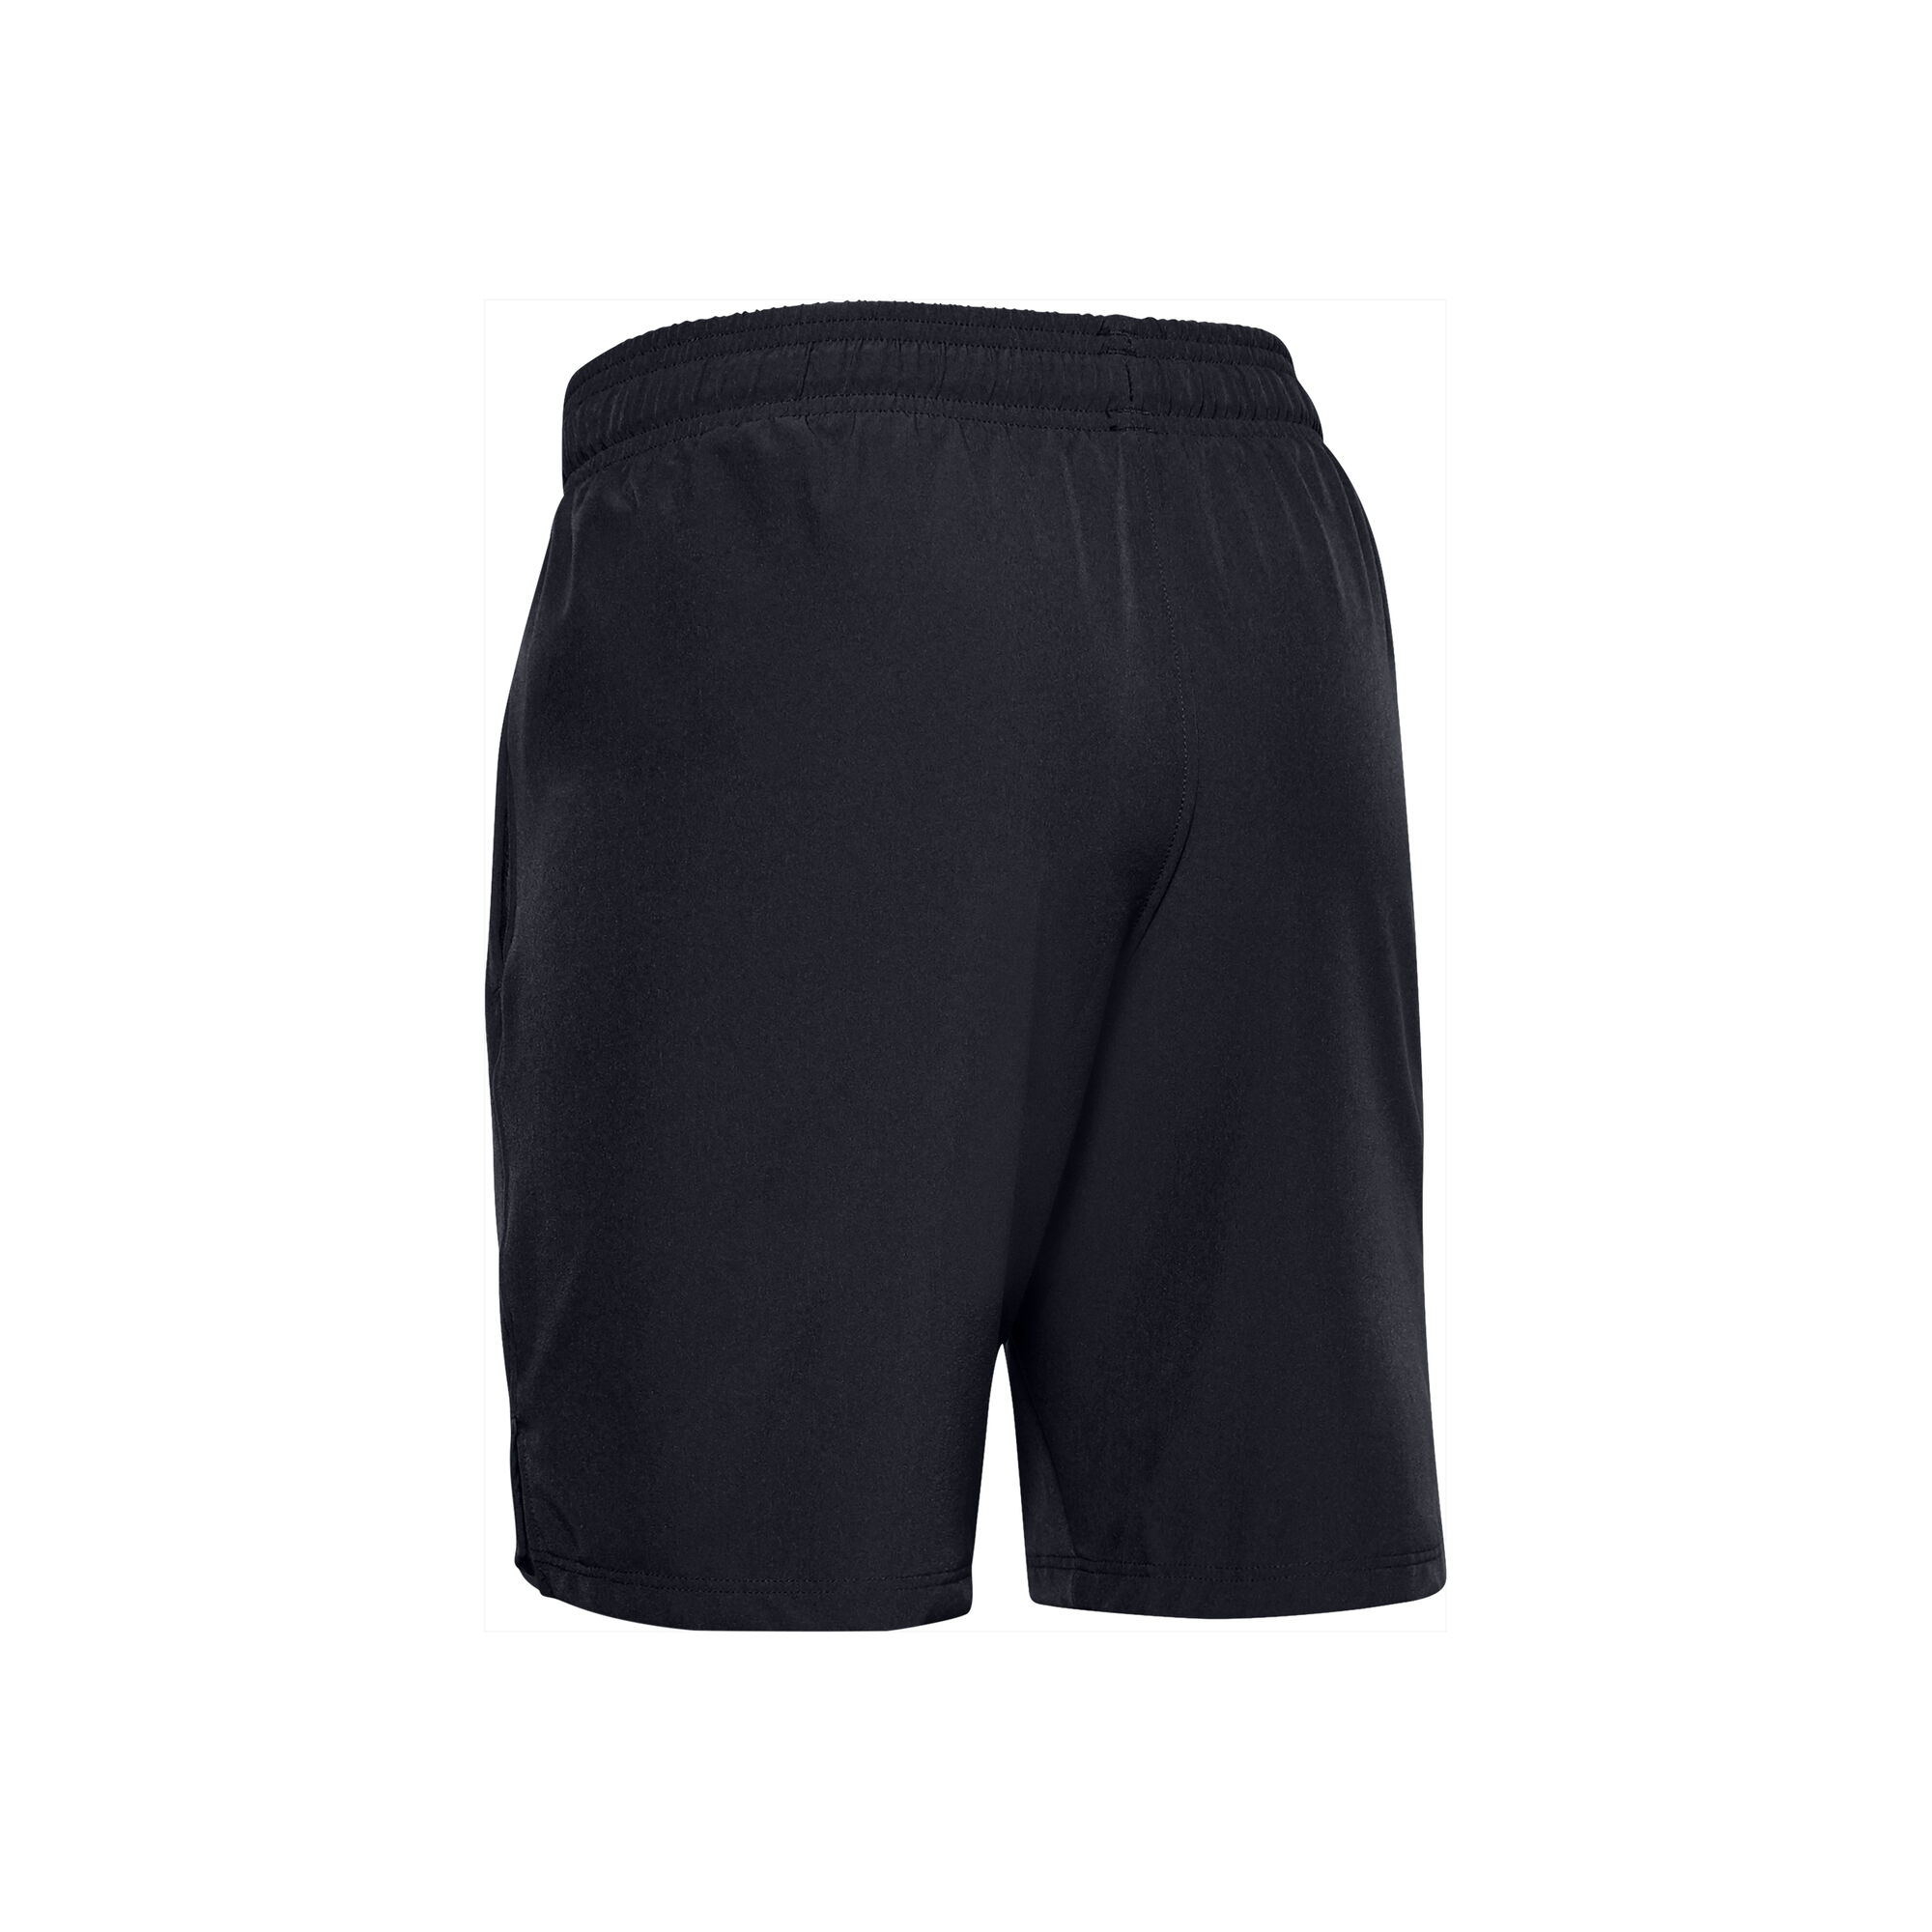 buy Under Armour Woven Shorts Boys - Black, White online | Tennis-Point